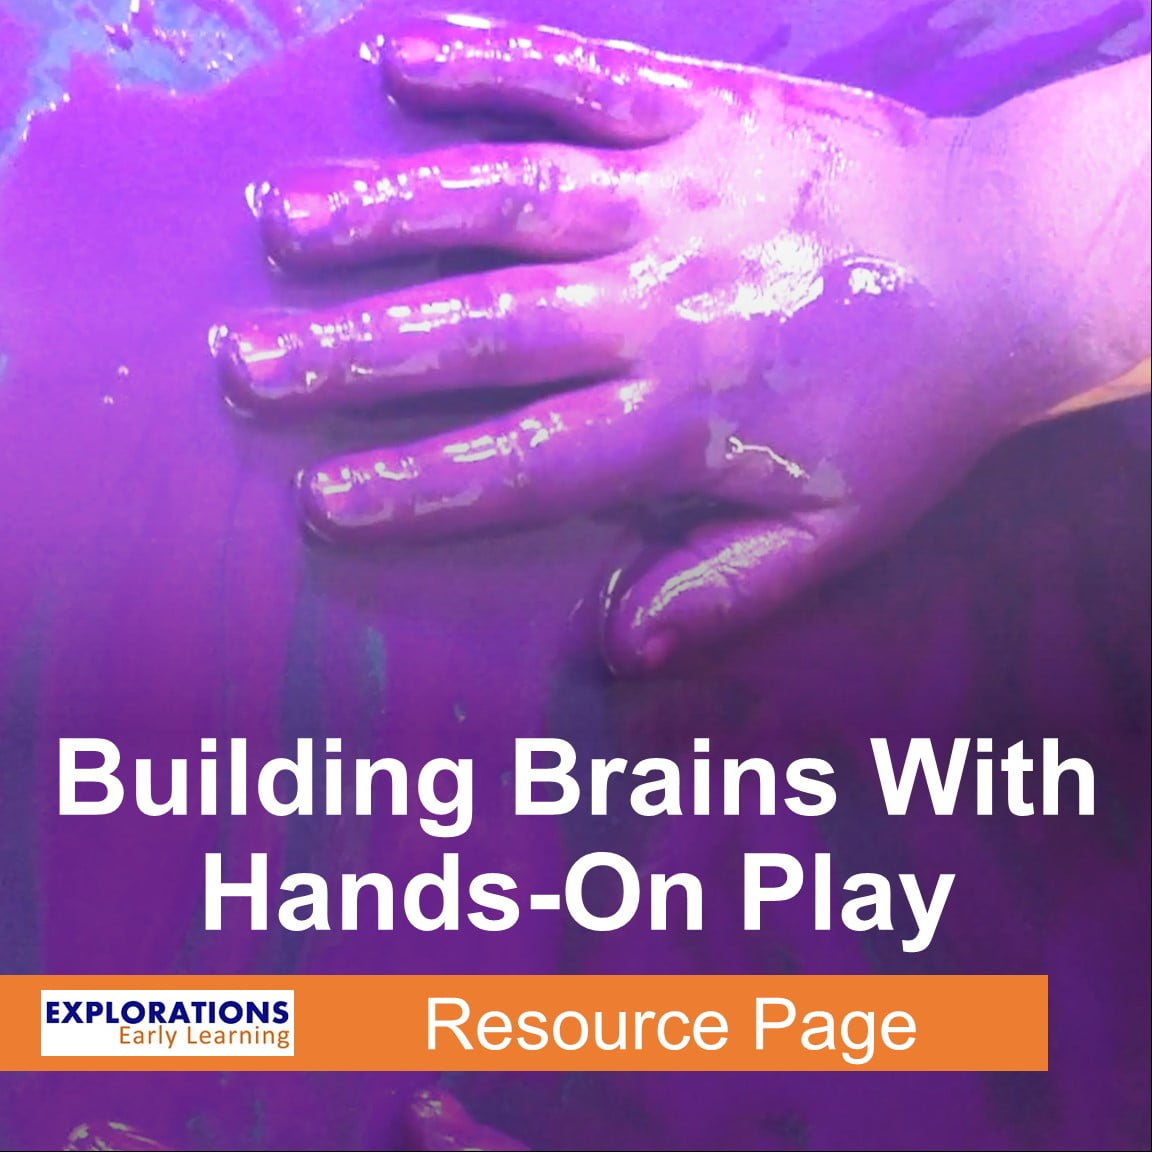 Building Brains With Hands-On Play | Resource Page